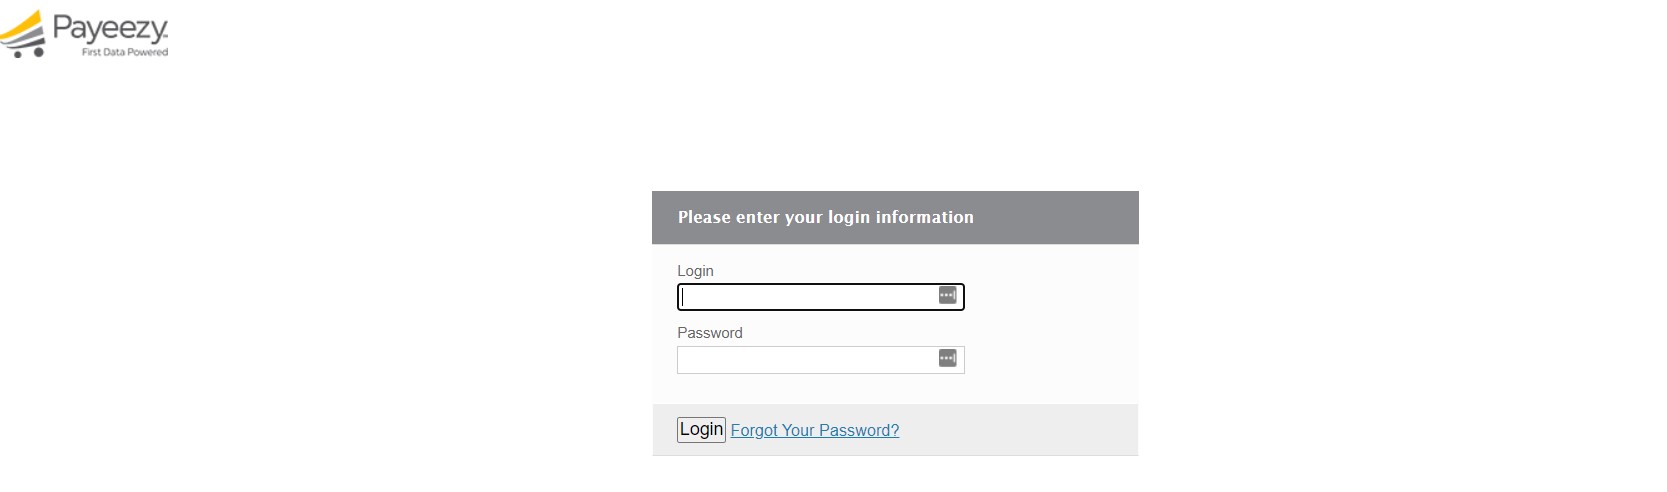 Step 1: Create your Payeezy Gateway account